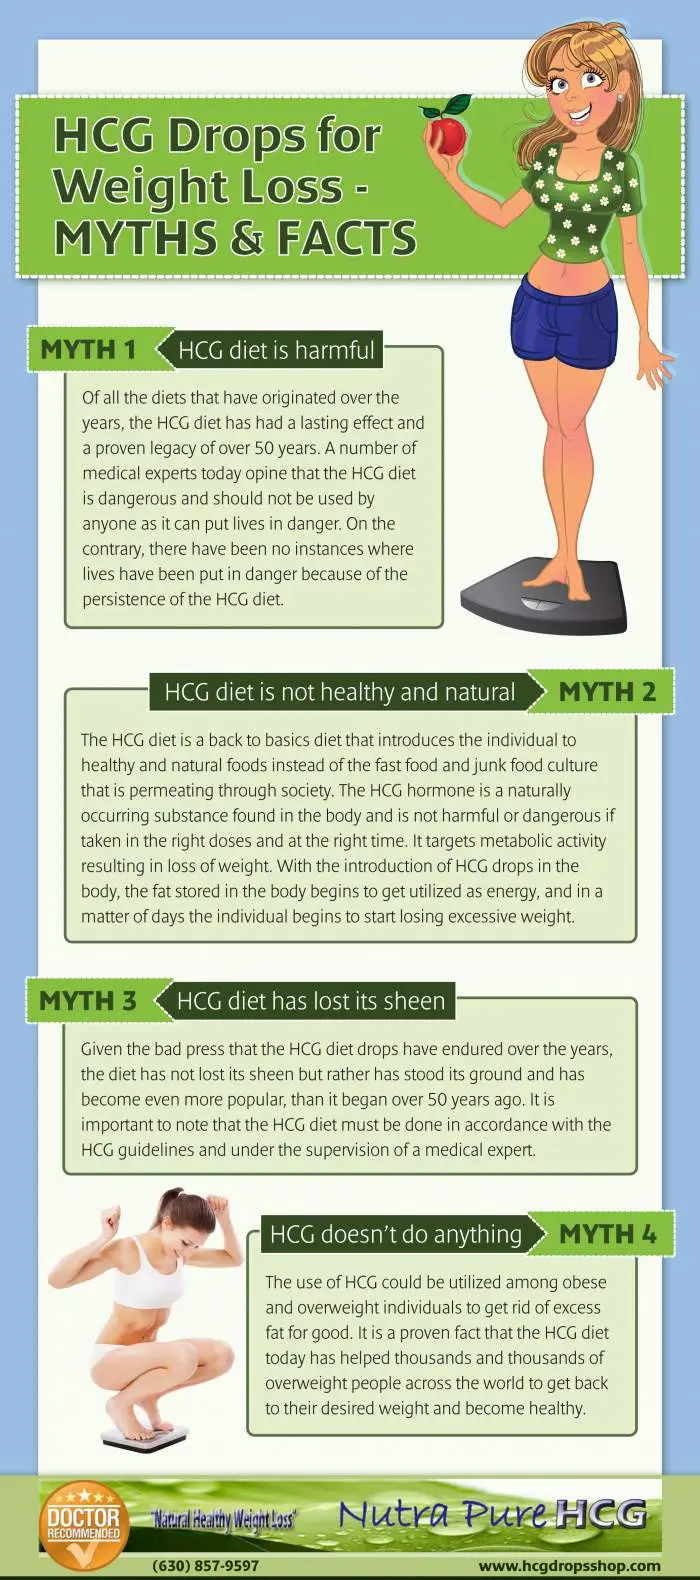 HCG Diet Myths & Facts [InfoGraphic]
